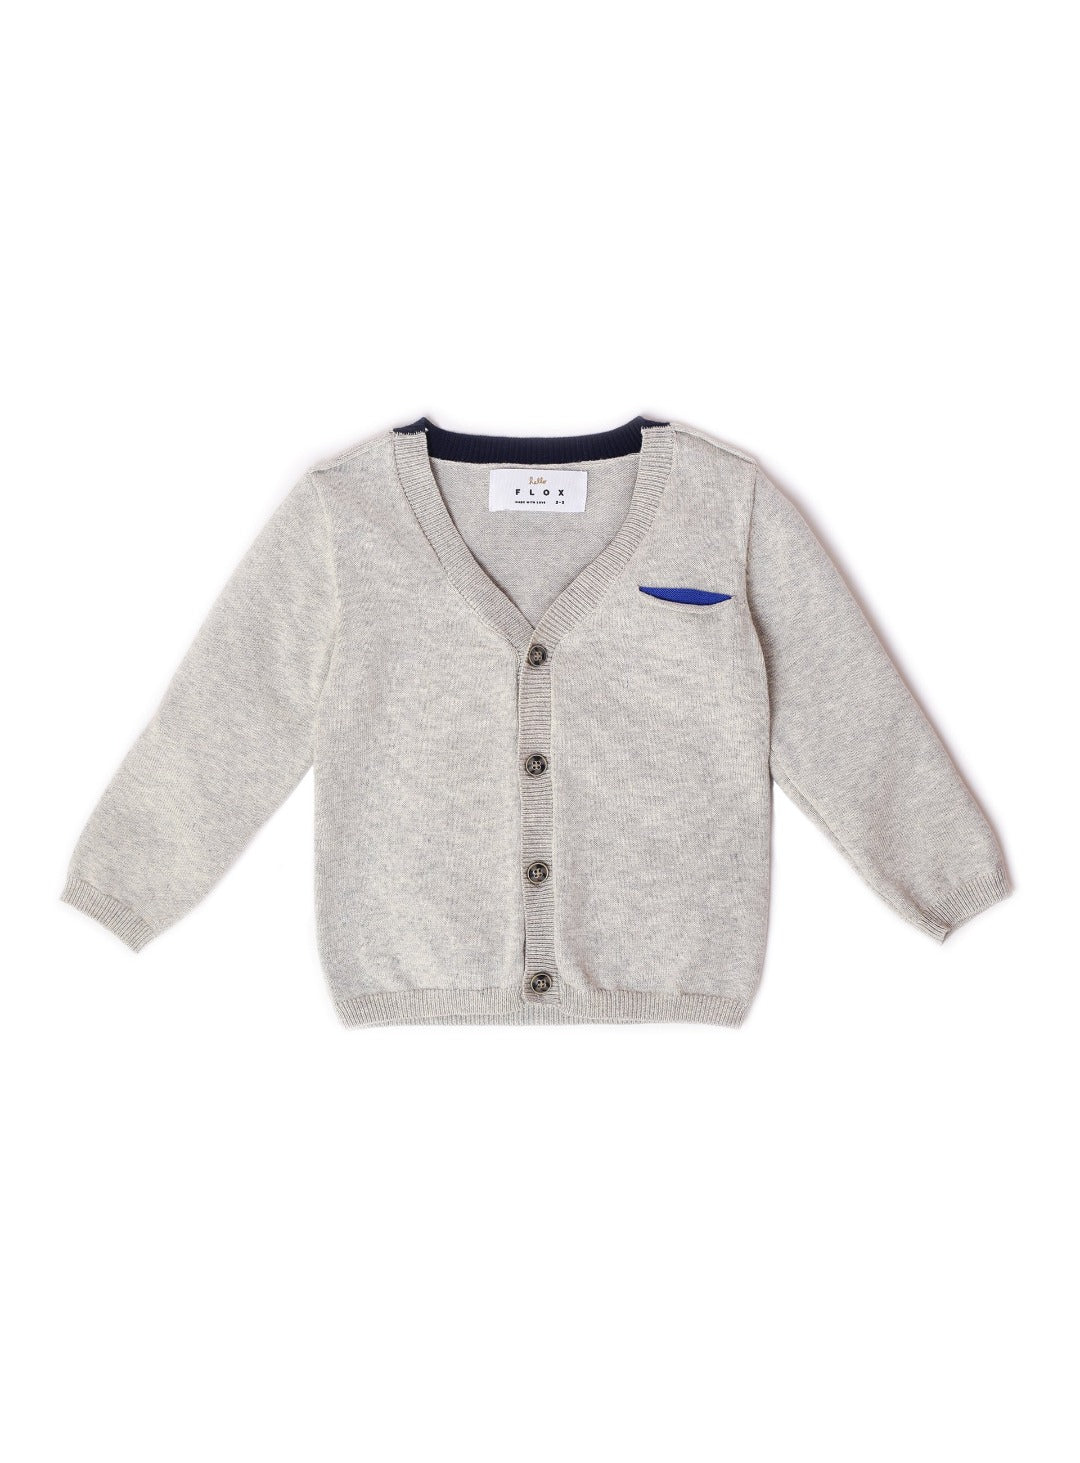 light gray cardigan with elbow patch accent